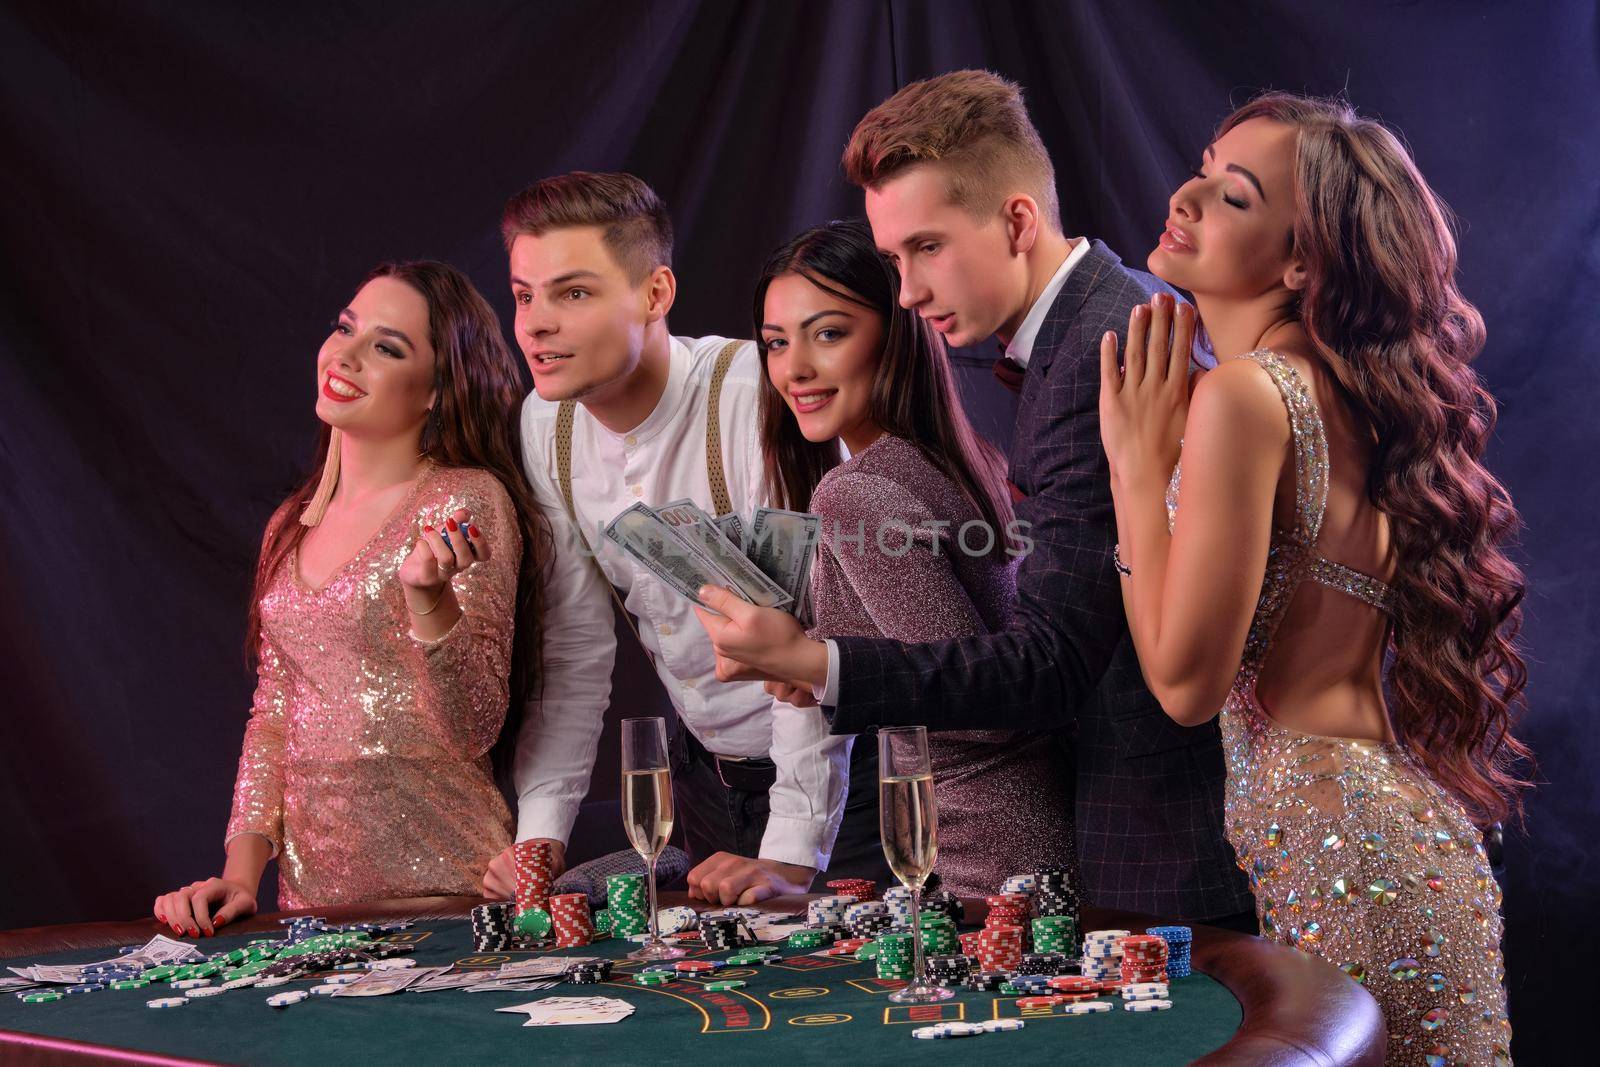 Friends playing poker at casino, at table with stacks of chips, money, cards, champagne on it. Celebrating win, smiling. Black background. Close-up. by nazarovsergey